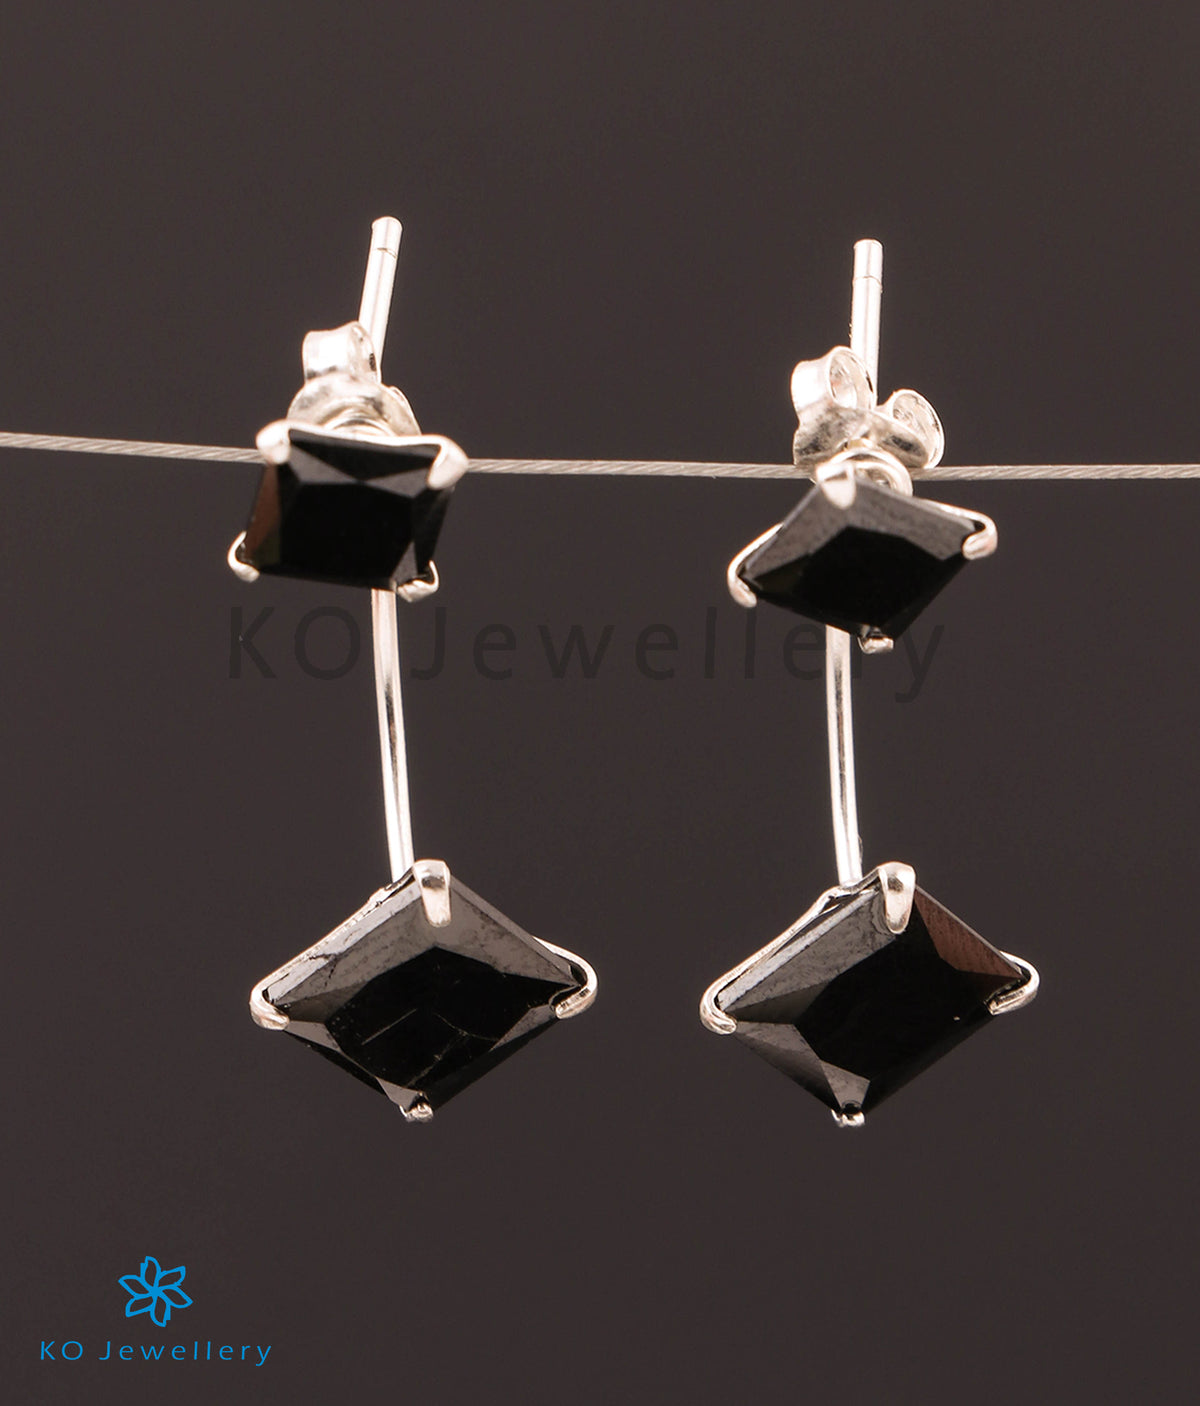 Buy Fine 925 Silver Earrings Pull Through Ears Dangling Tiny Online in  India  Etsy